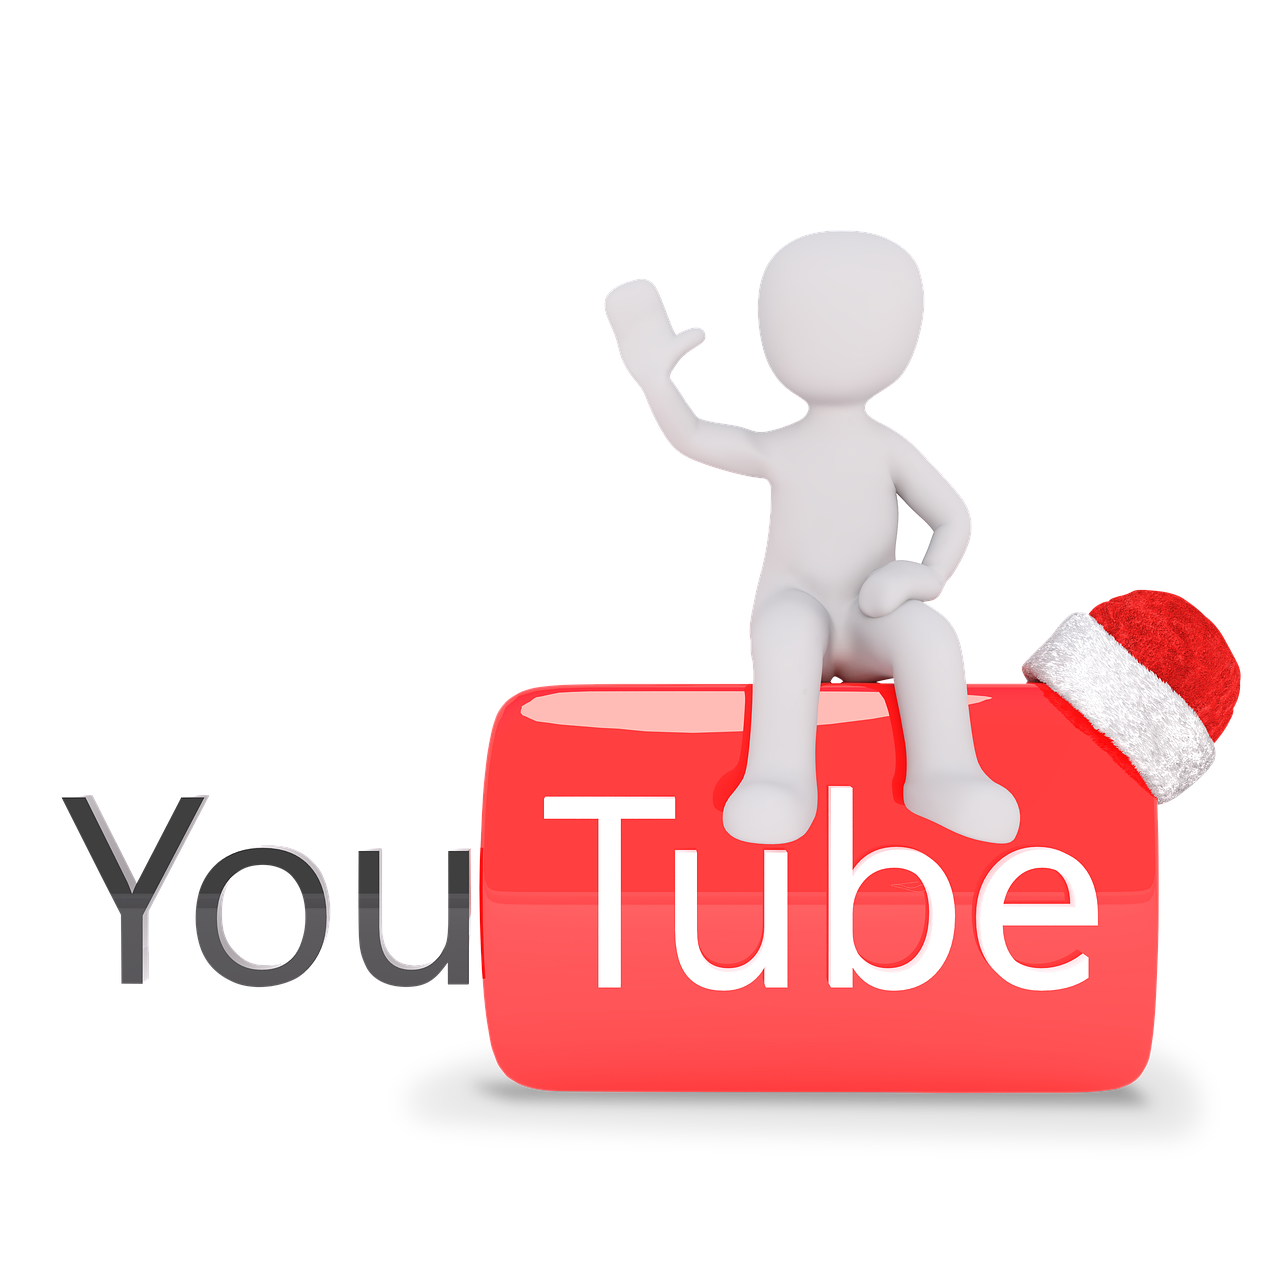 YouTube Proxy - Watch YouTube Videos Any Time Anywhere